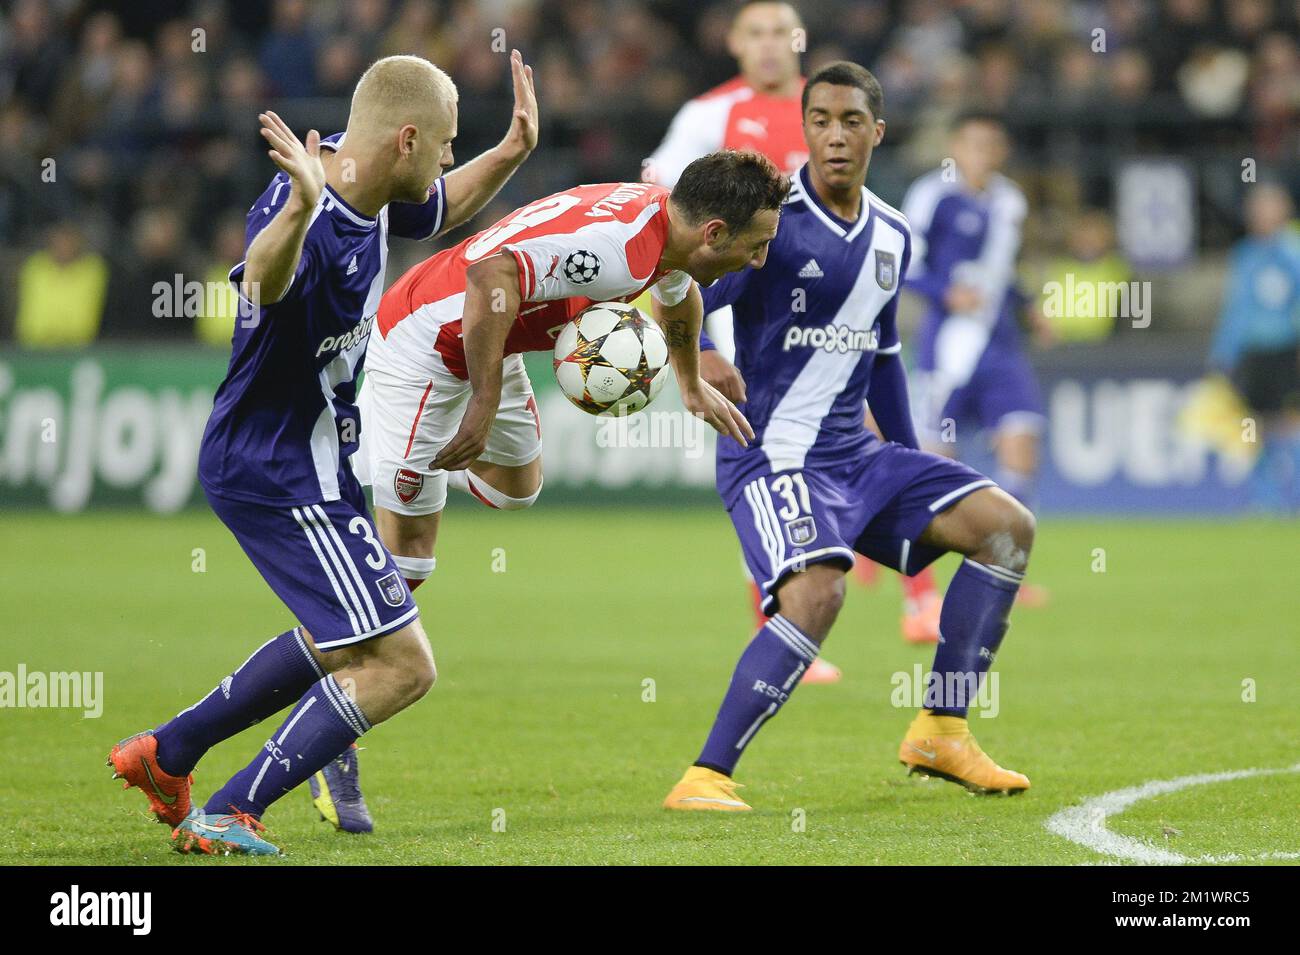 20141022 - BRUSSELS, BELGIUM: Anderlecht's Olivier Deschacht and Arsenal's Santi Cazorla fight for the ball during a third group stage game between RSCA Anderlecht and English team Arsenal, in the group D of the UEFA Champions League competition, Wednesday 22 October 2014. BELGA PHOTO LAURIE DIEFFEMBACQ Stock Photo